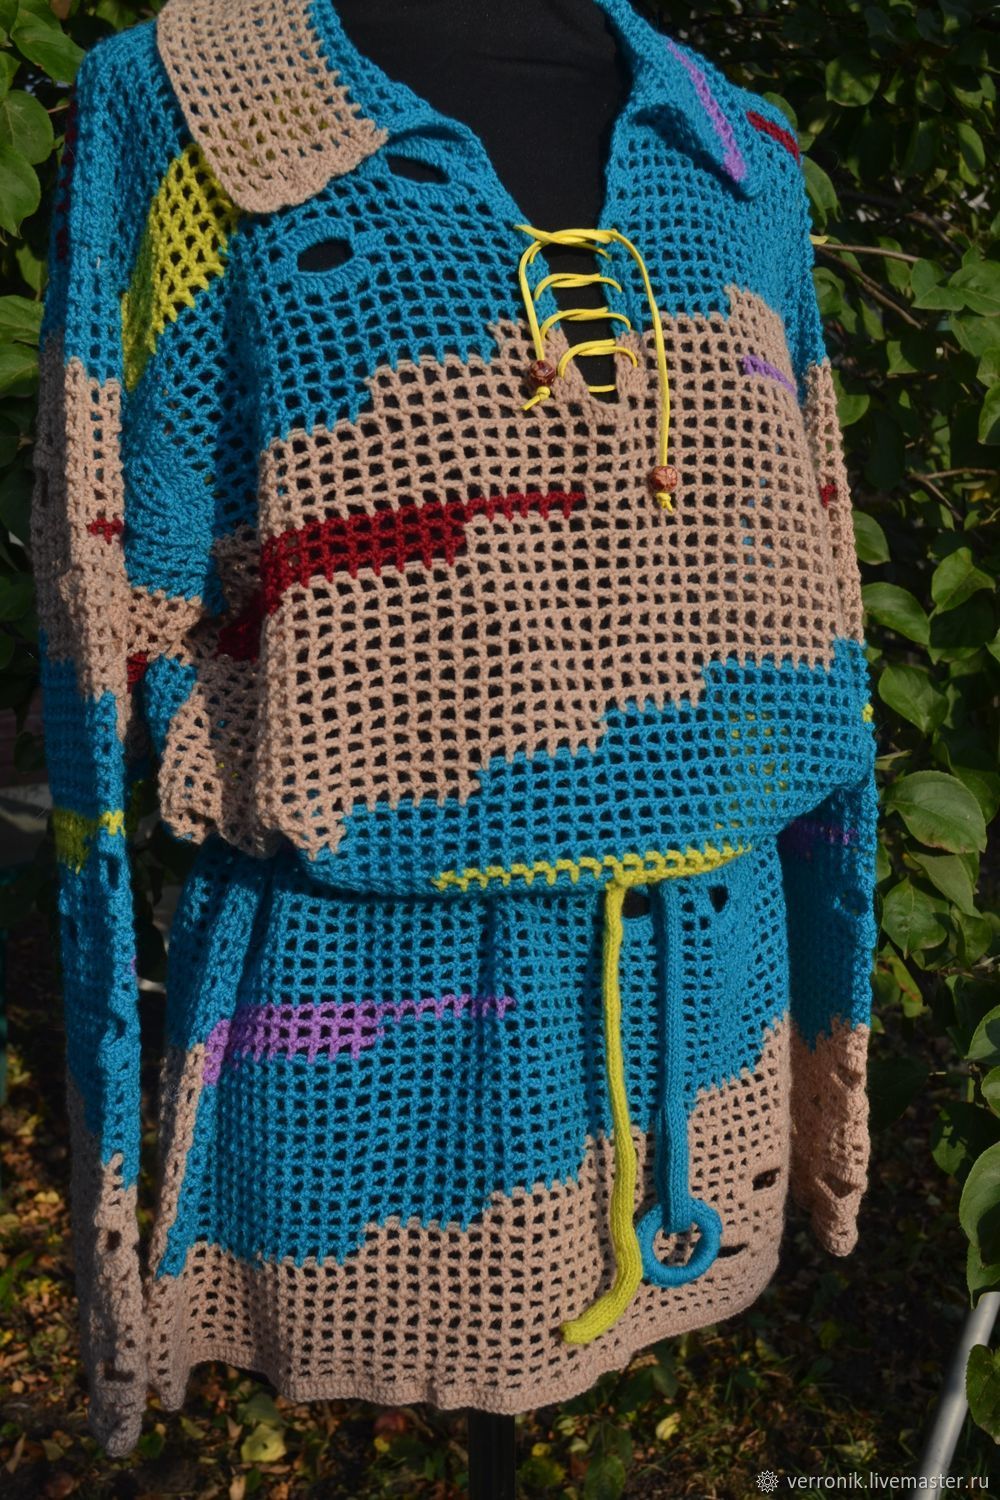 Clothing.Tunic. Tunic knitted `Stained glass 2` Turquoise, beige. Boho. Handmade Coats and sweaters handmade. Capitanich knitted `Stained glass 2` Turquoise. Handmade.  Shop masters of Dominica.
